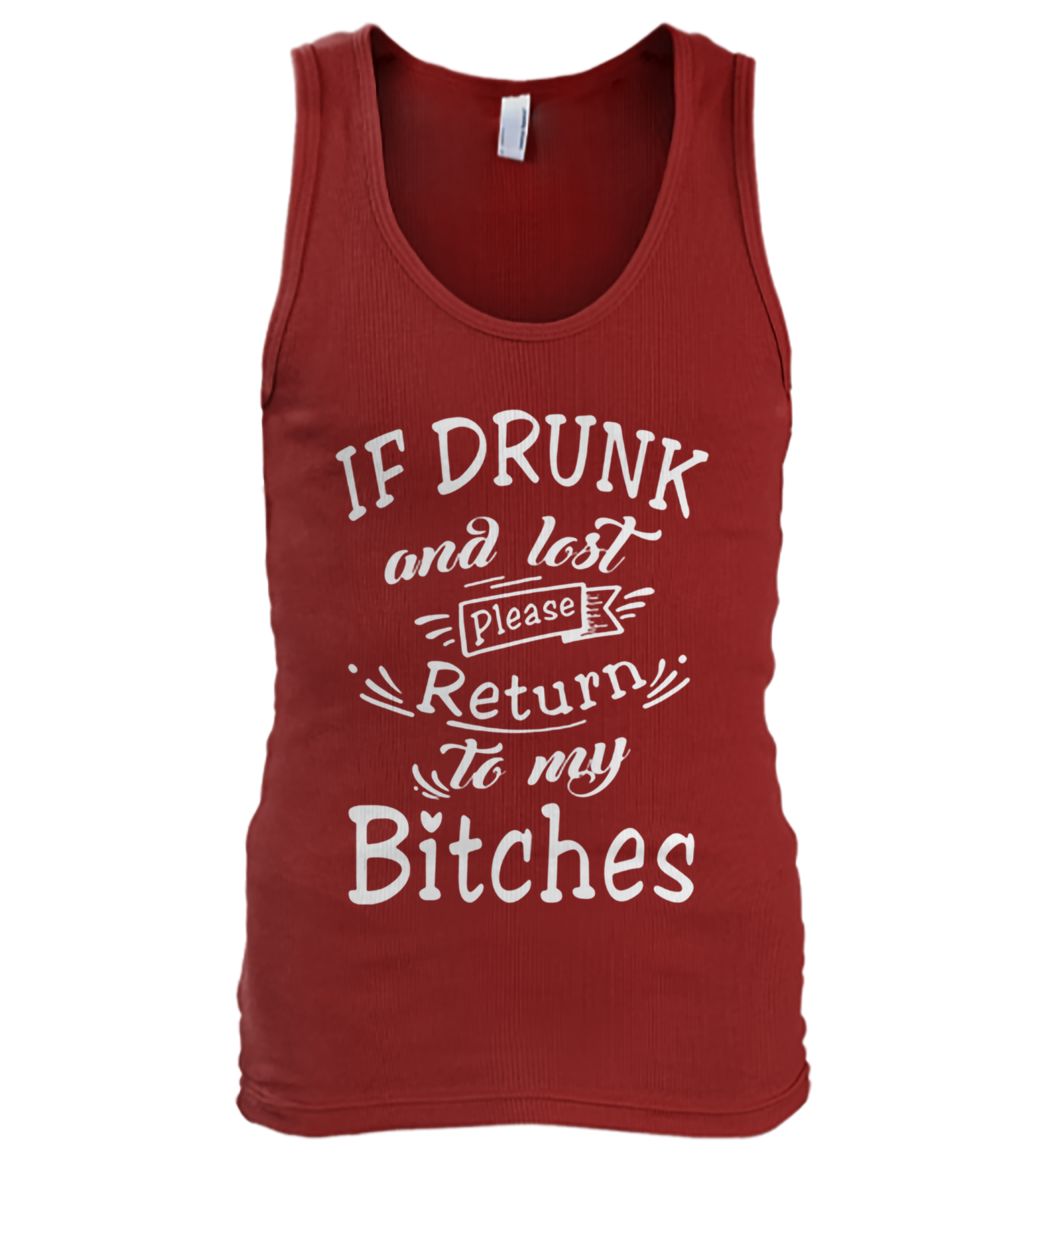 If drunk and lost please return to my bitches men's tank top